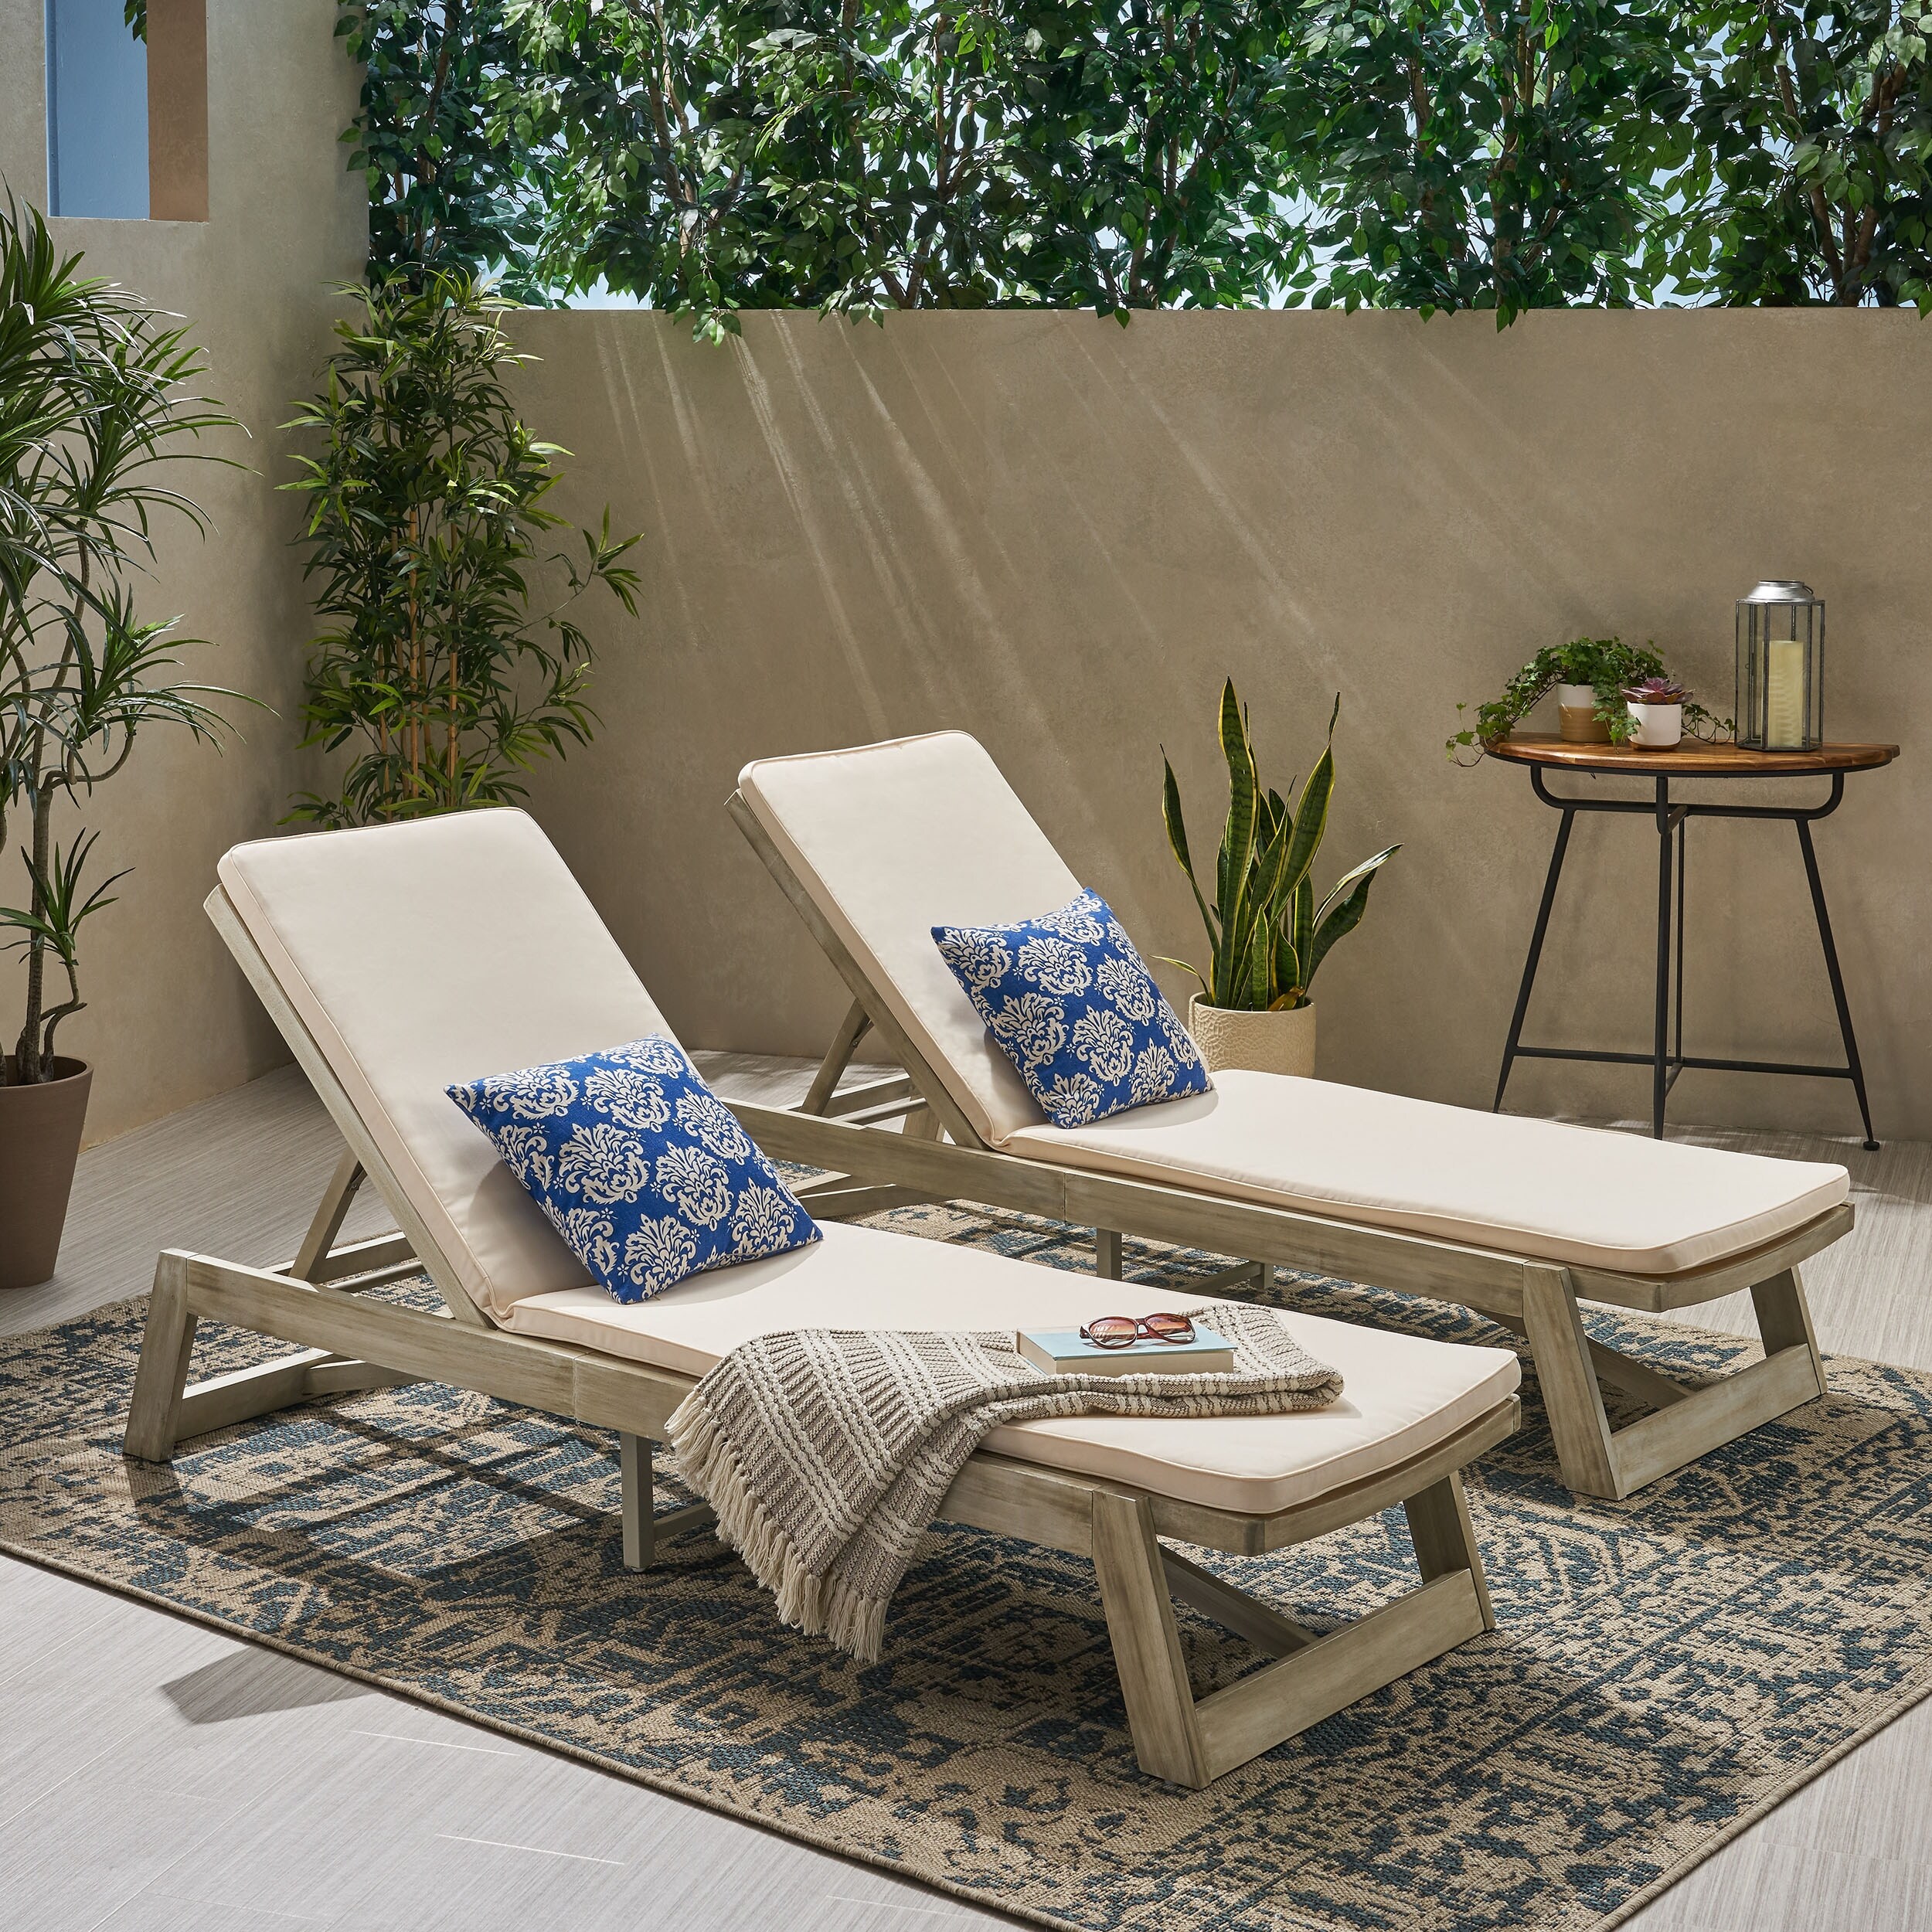 Maki Outdoor Acacia Wood Chaise Lounge And Cushion Set (set Of 2) By Christopher Knight Home